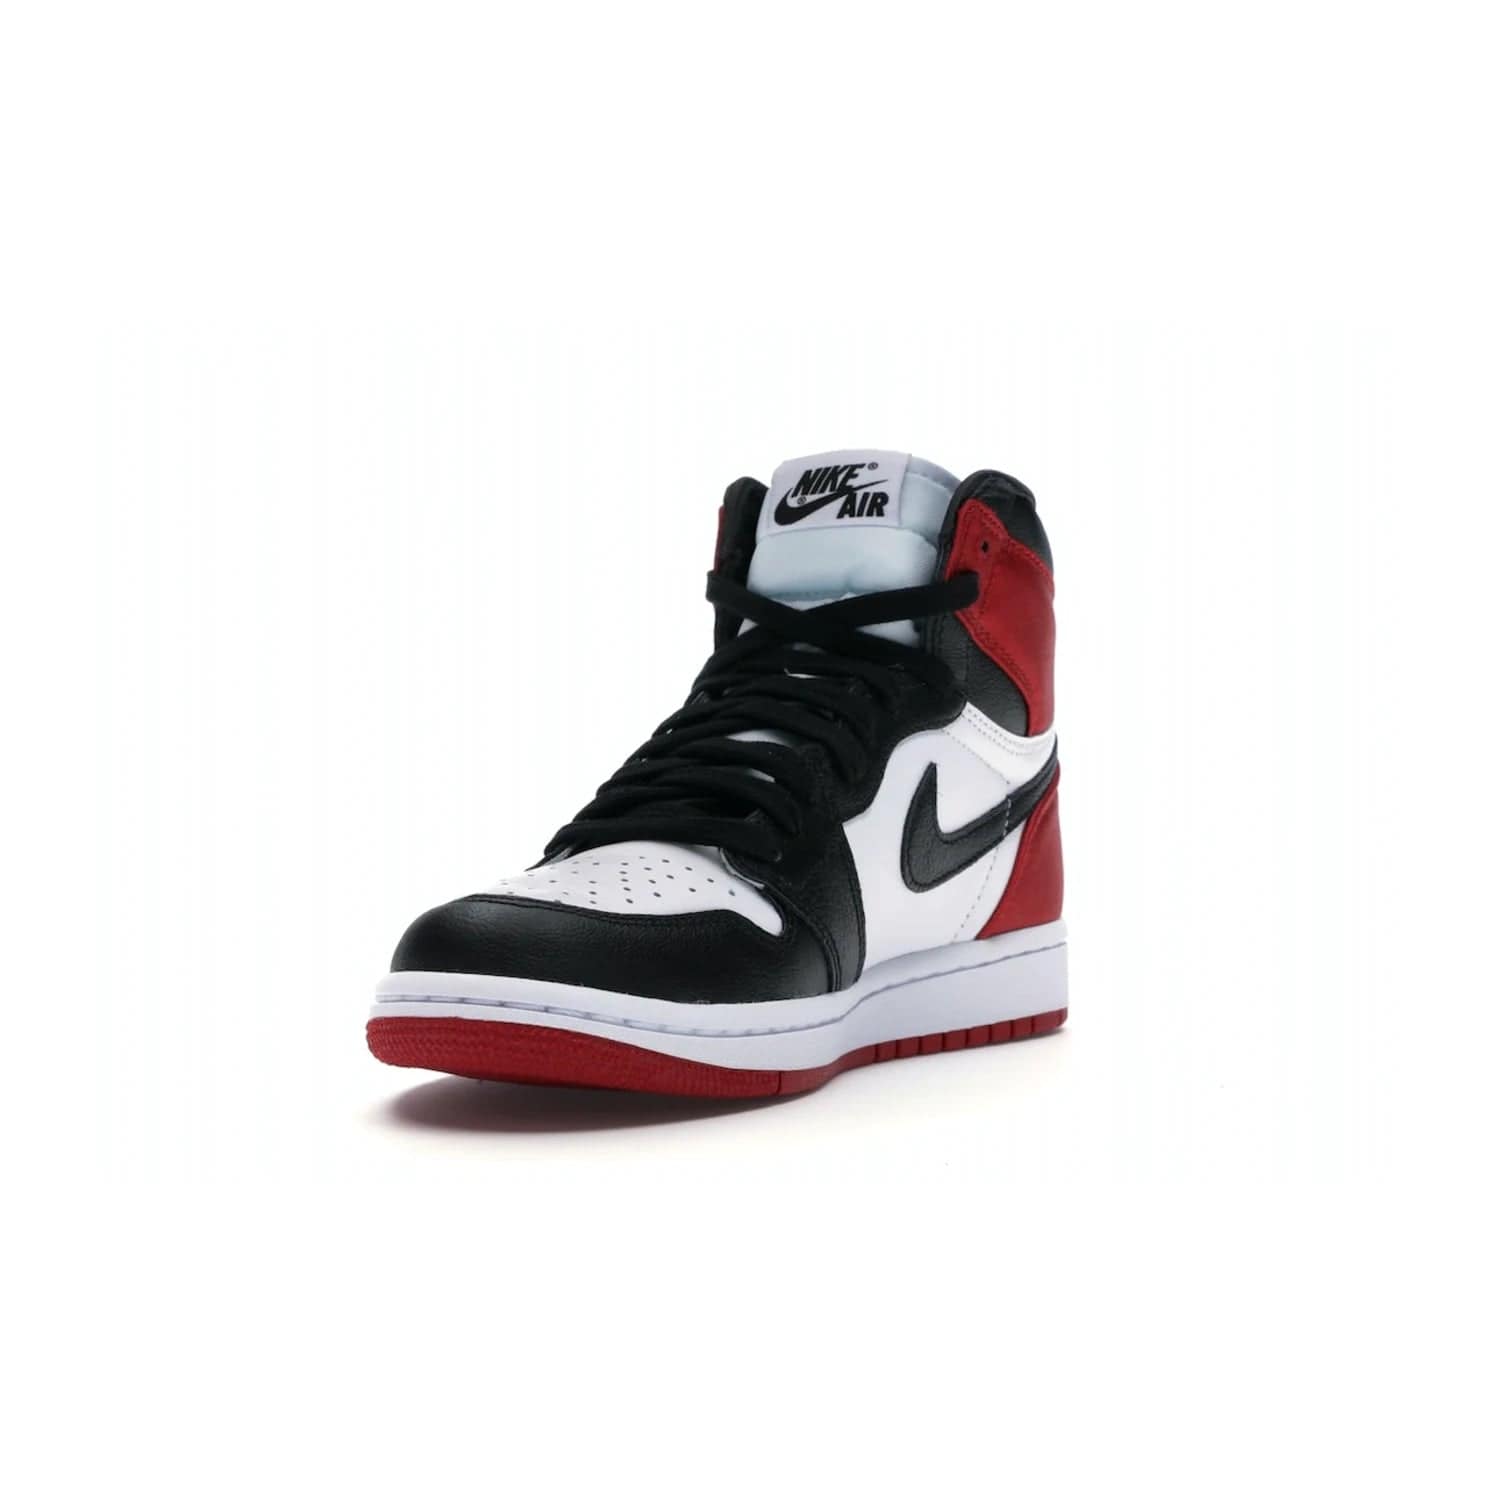 Jordan 1 Retro High Satin Black Toe (Women's) - Image 13 - Only at www.BallersClubKickz.com - Luxurious take on the timeless Air Jordan 1. Features a mix of black leather and satin materials with subtle University Red accents. Elevated look with metal Wings logo on the heel. Released in August 2019.